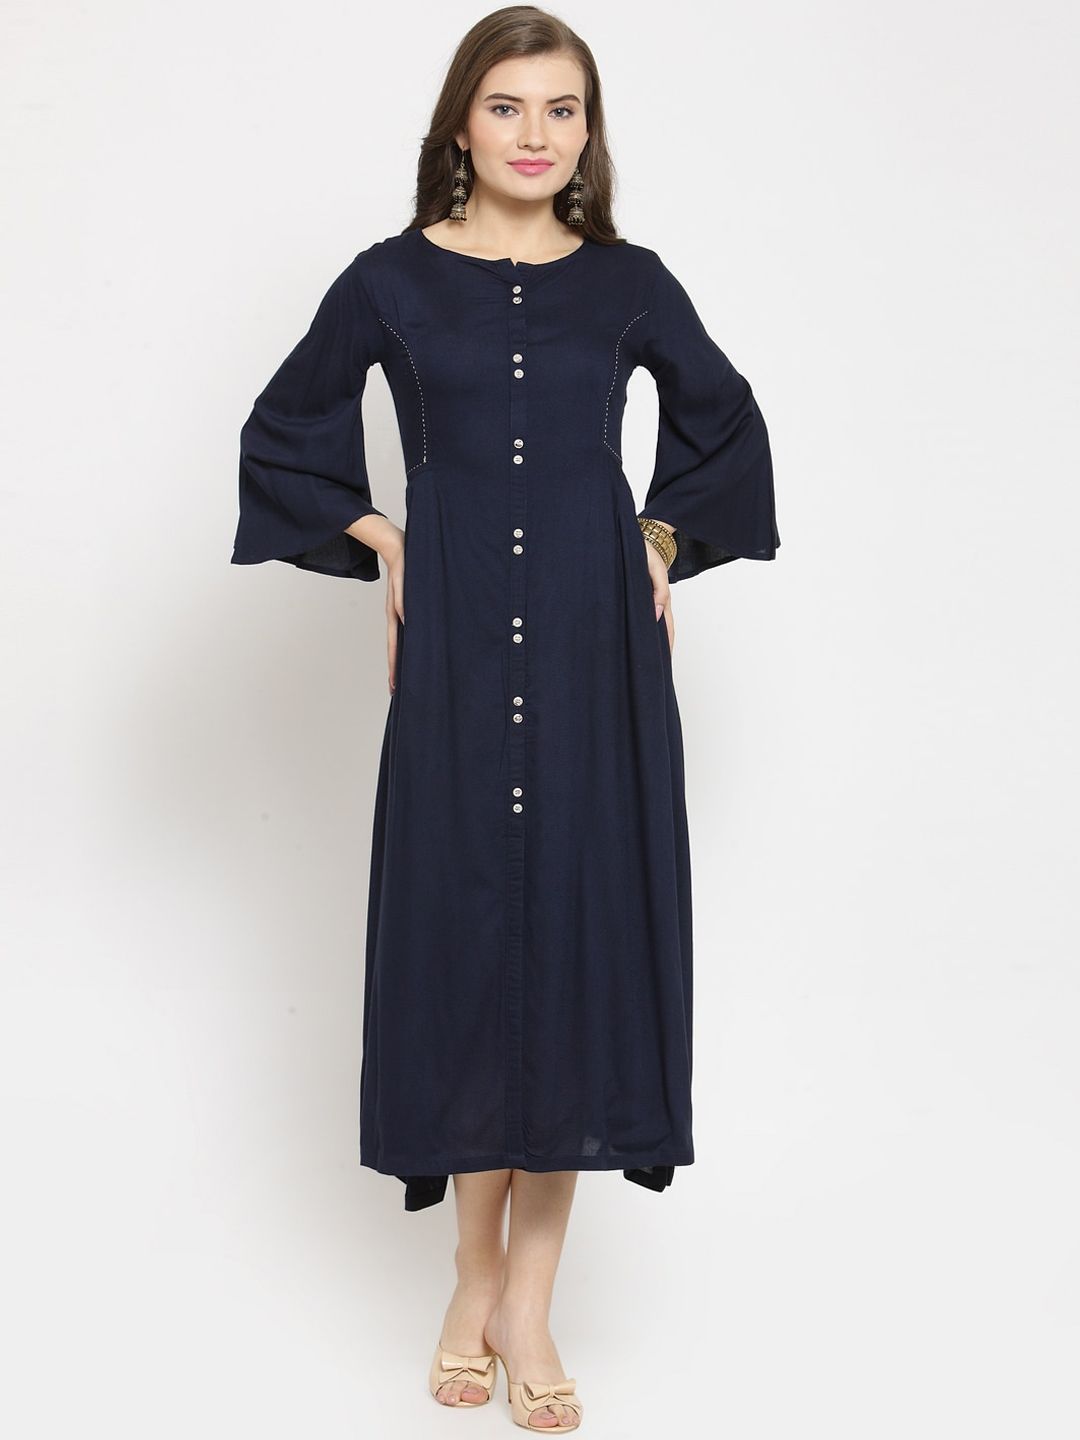 Kvsfab Women Navy Blue Solid A-Line Dress Price in India